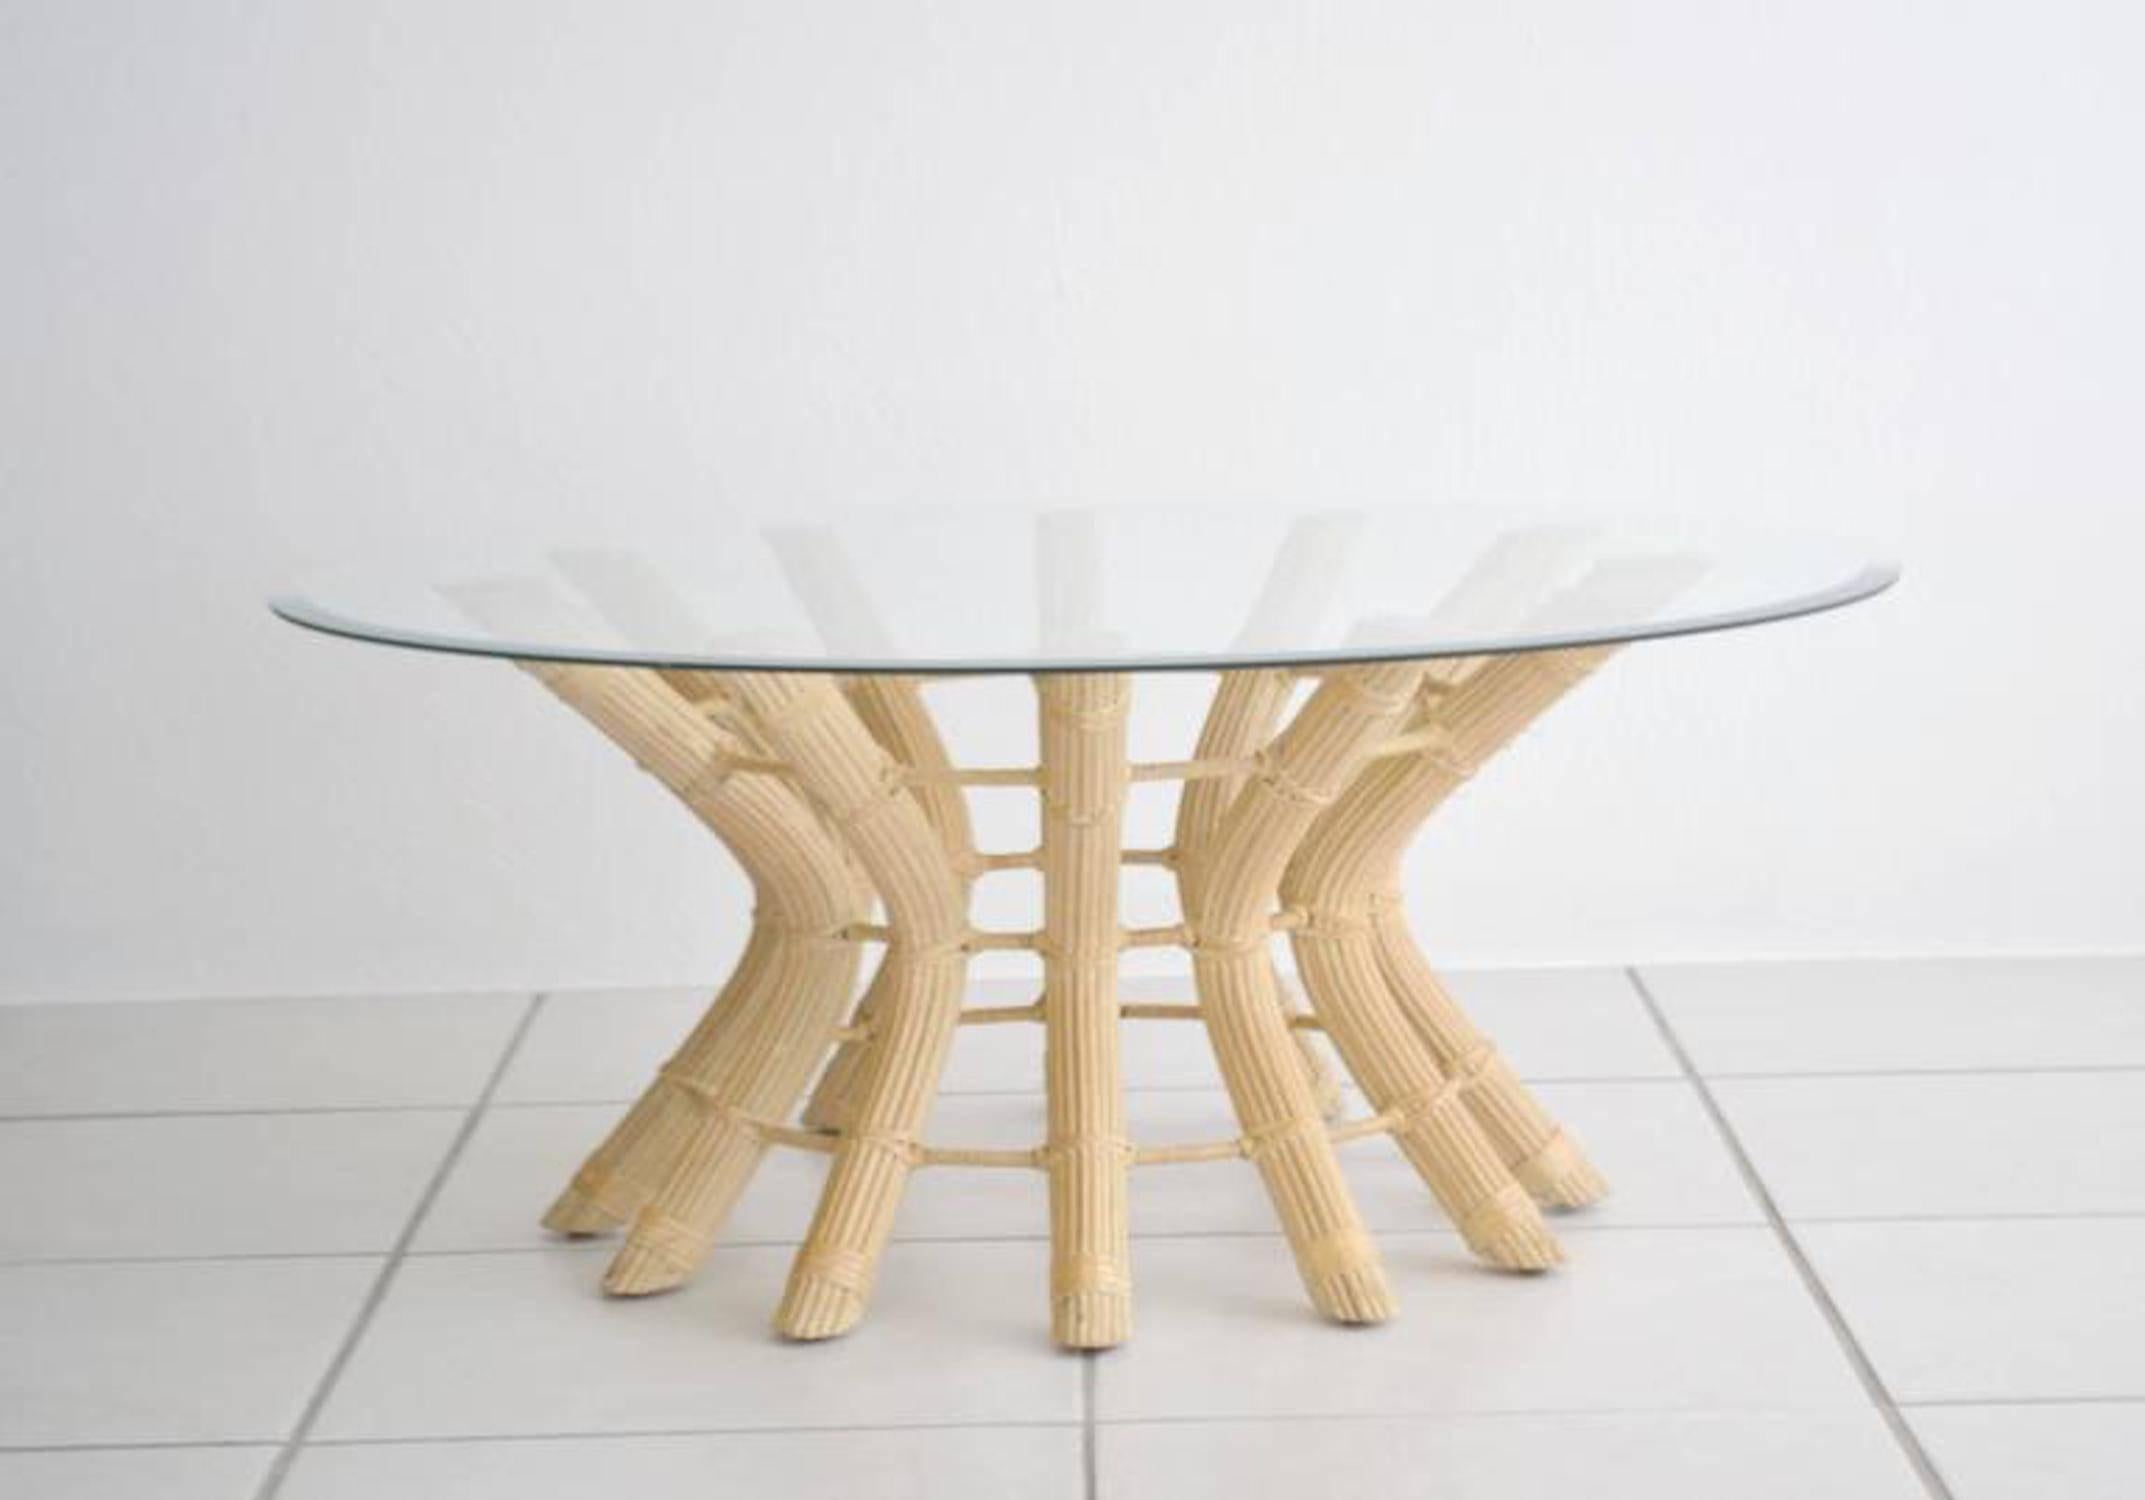 Striking midcentury sculptural rattan cocktail table, circa 1960s-1970s. This exquisitely crafted round coffee table is designed of bleached cut rattan strips over an undulating metal frame with leather wrapped joints. The table is accented with a